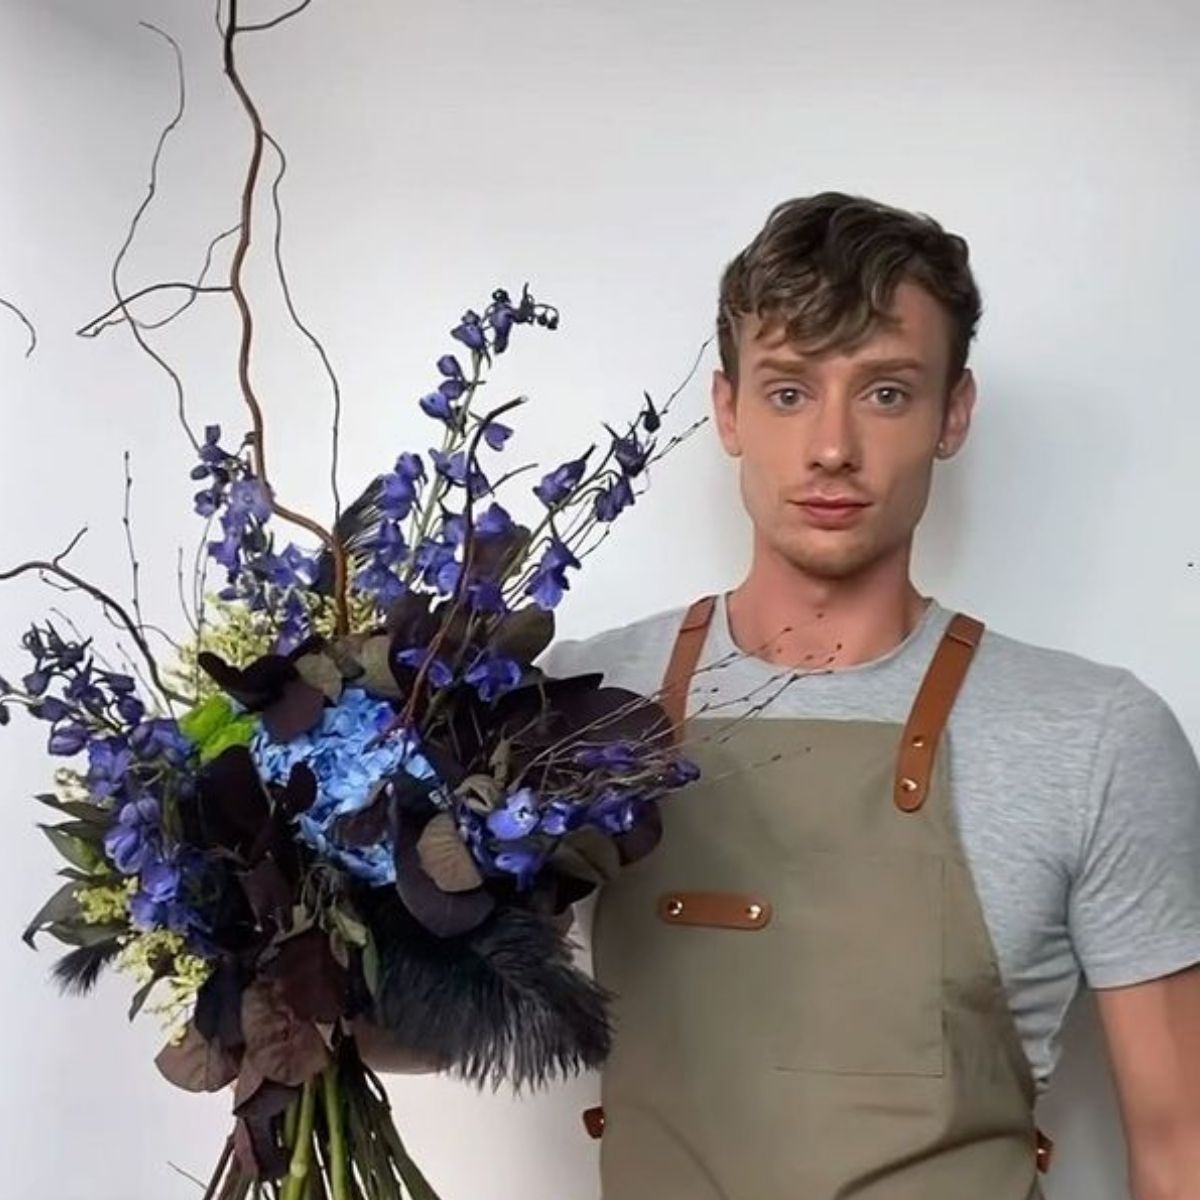 alexander-campbell-known-as-@acfloralstudio-is-a-real-tiktok-and-instagram-guru-with-over-1-million-followers-featured